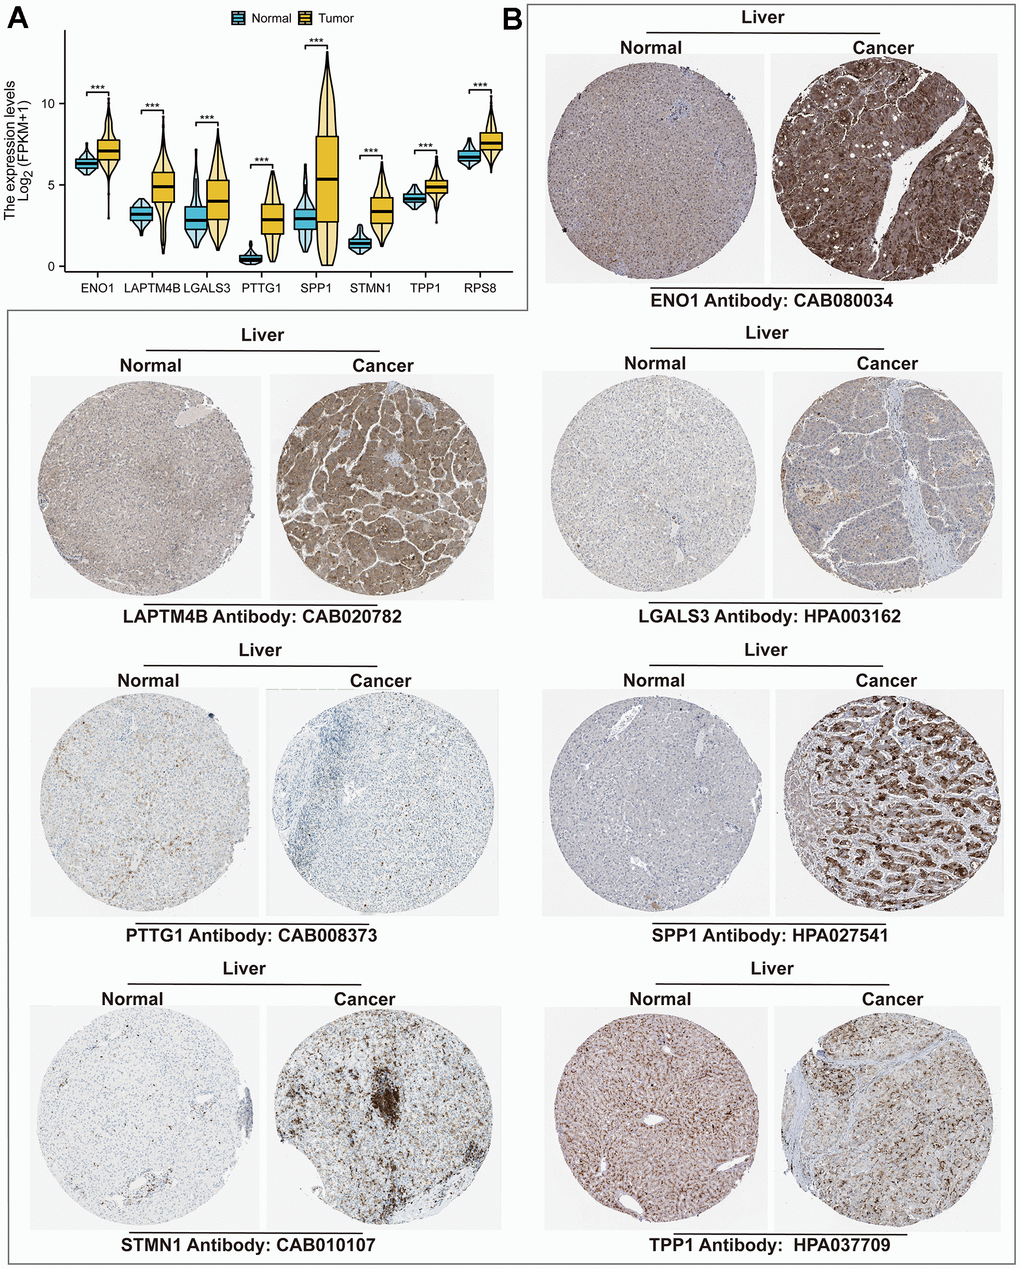 TRSSys-related genes in HCC. (A) Differential expression of TRSSys-related TRGs in tumor and normal tissues. (B) Immunohistochemical images of TRSSys-related TRGs in the HPA.